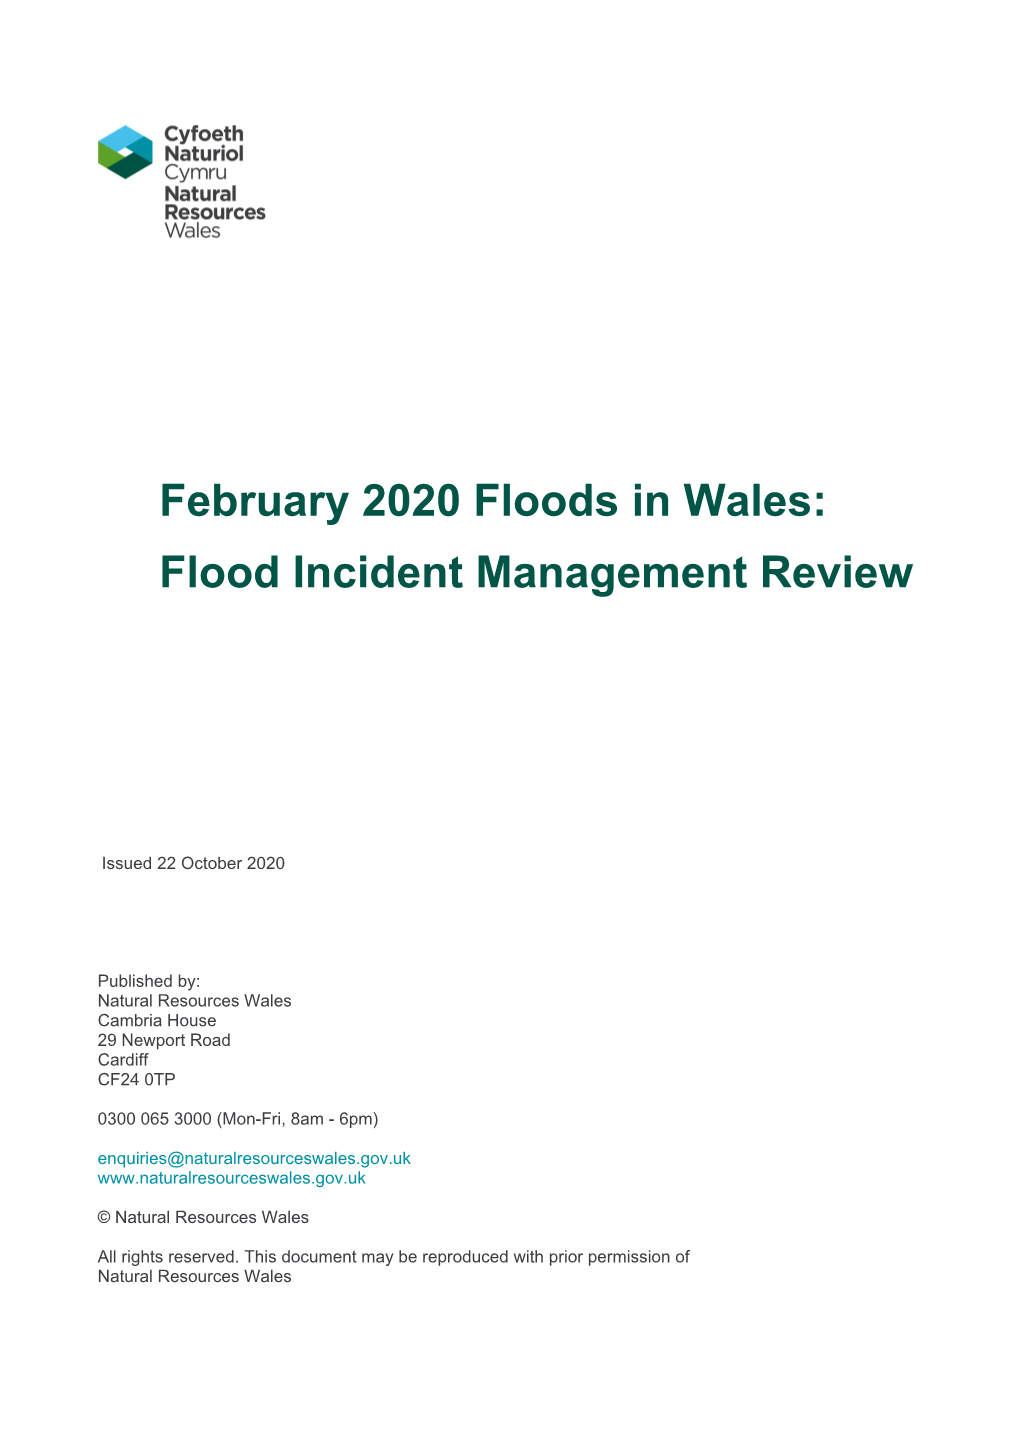 February 2020 Floods in Wales: Flood Incident Management Review